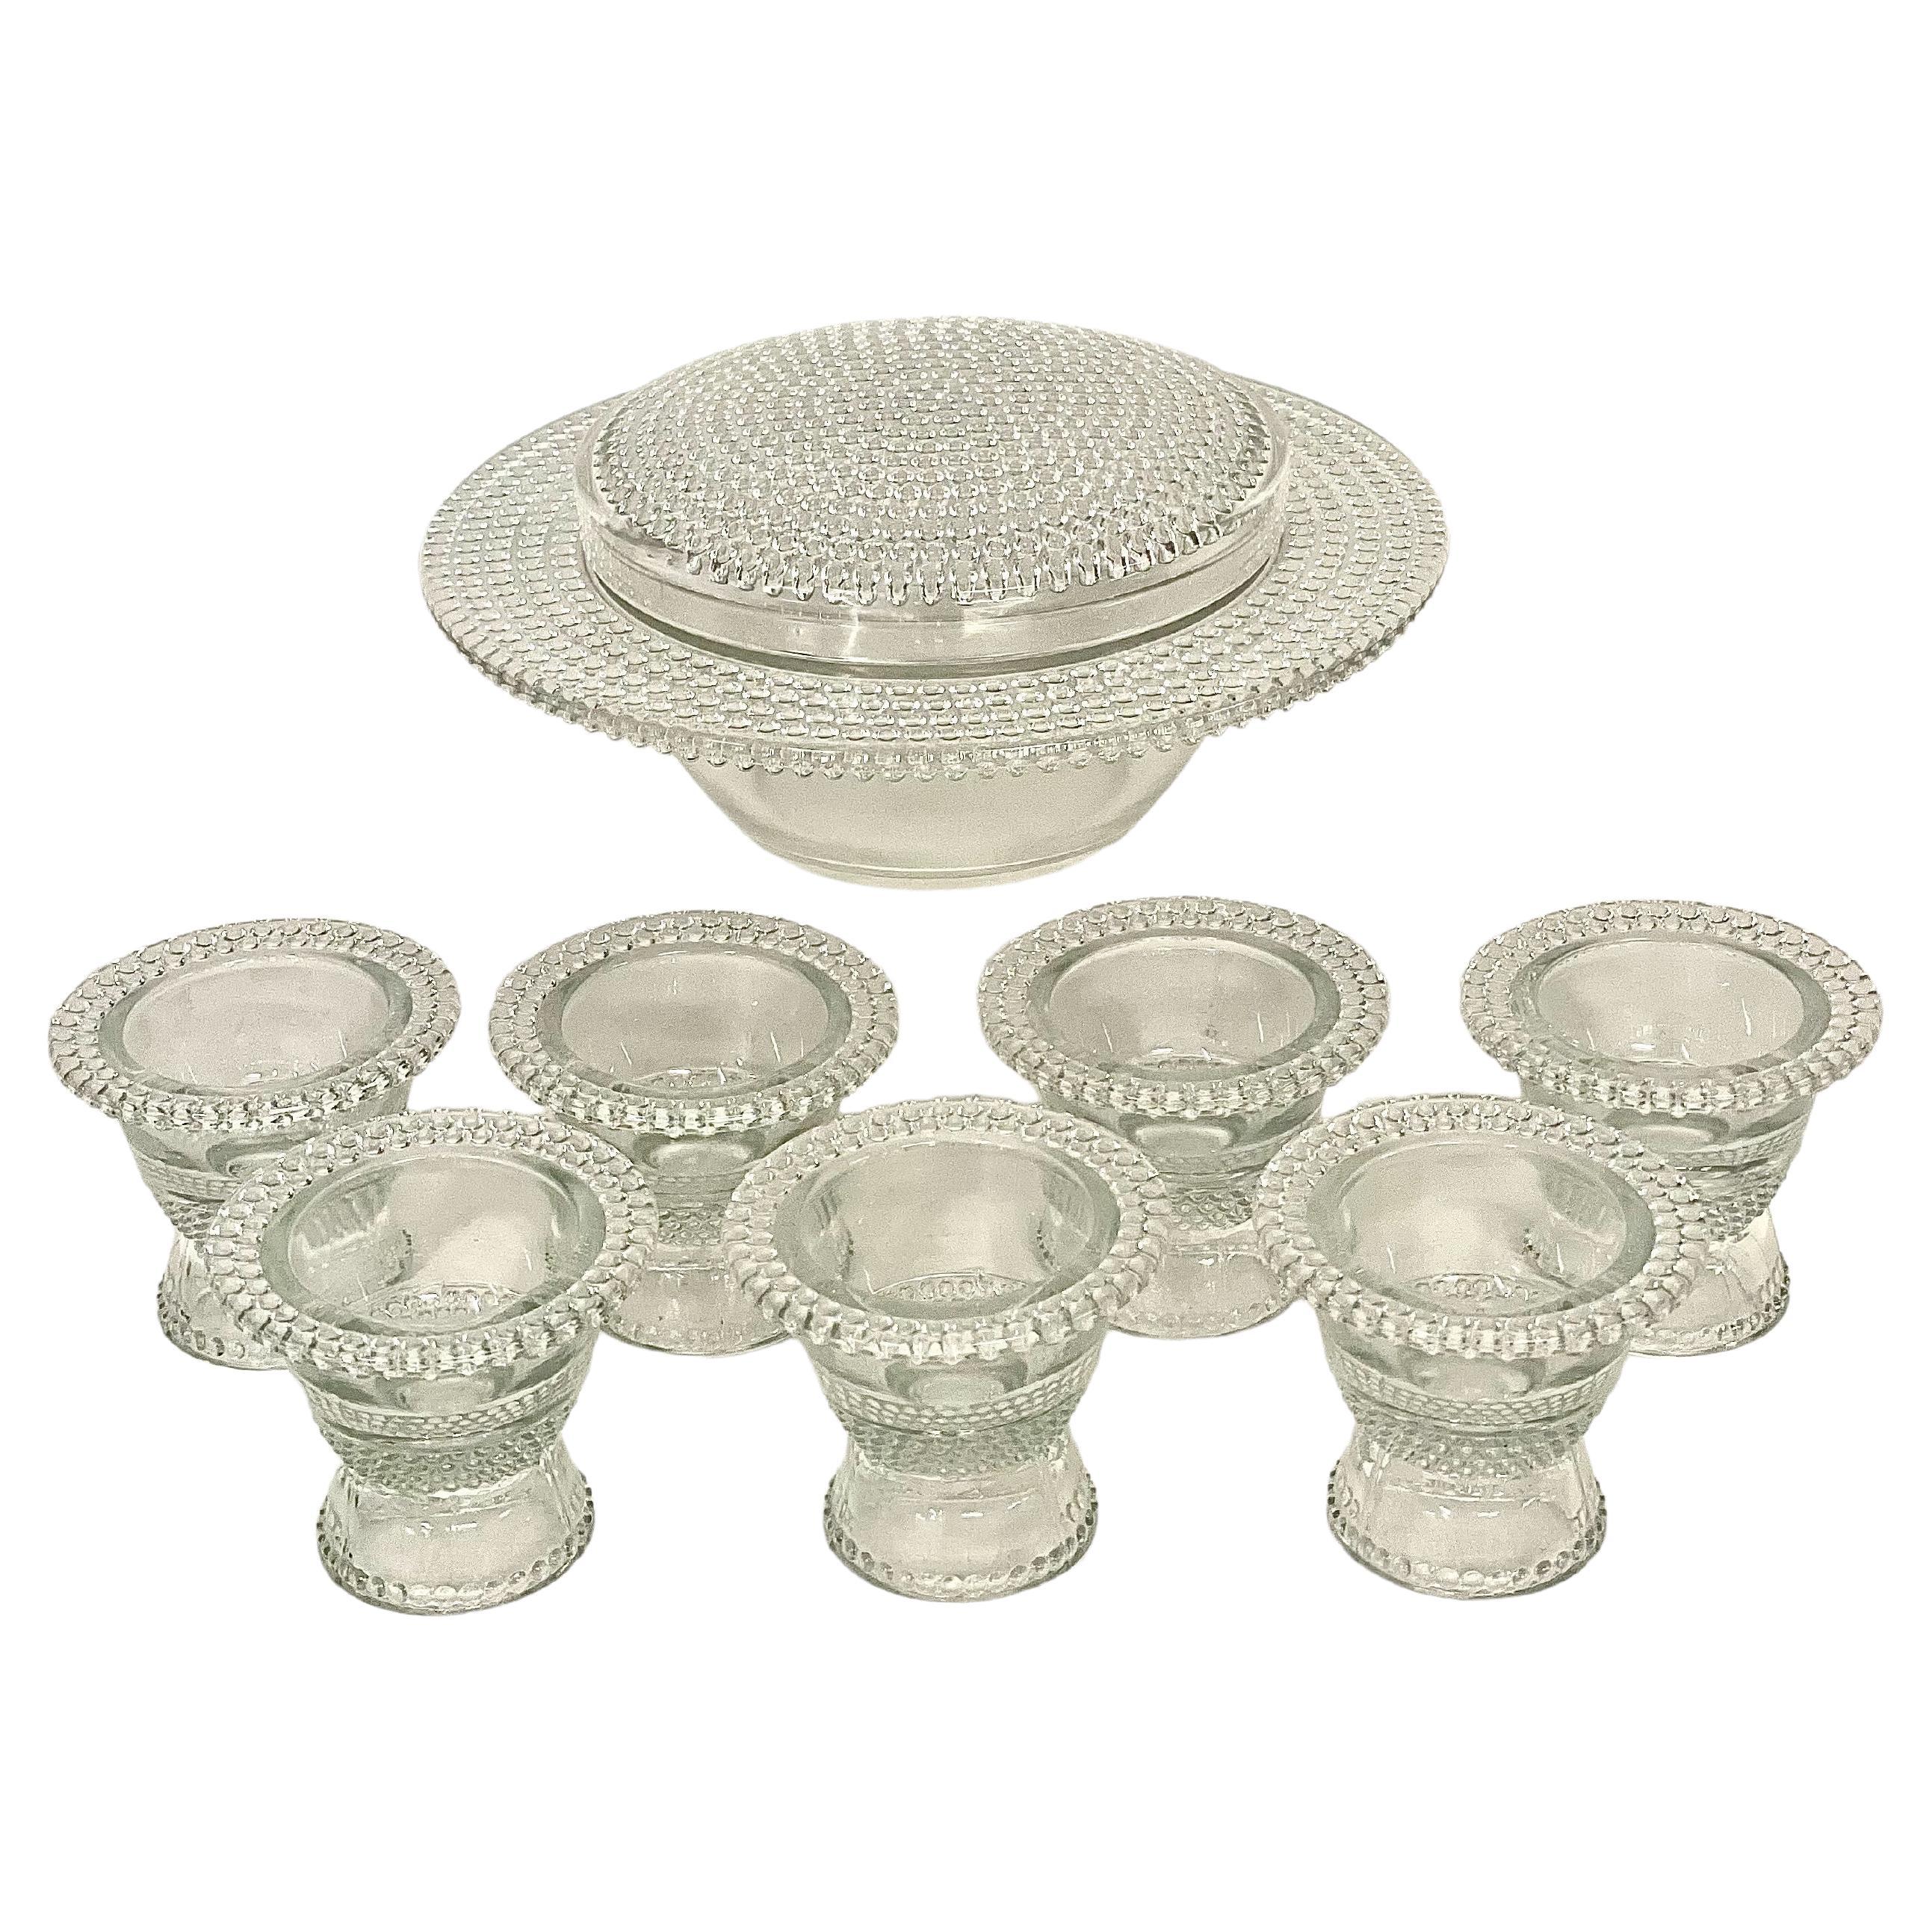 French René Lalique Nippon Breakfast Service of 8 Pieces